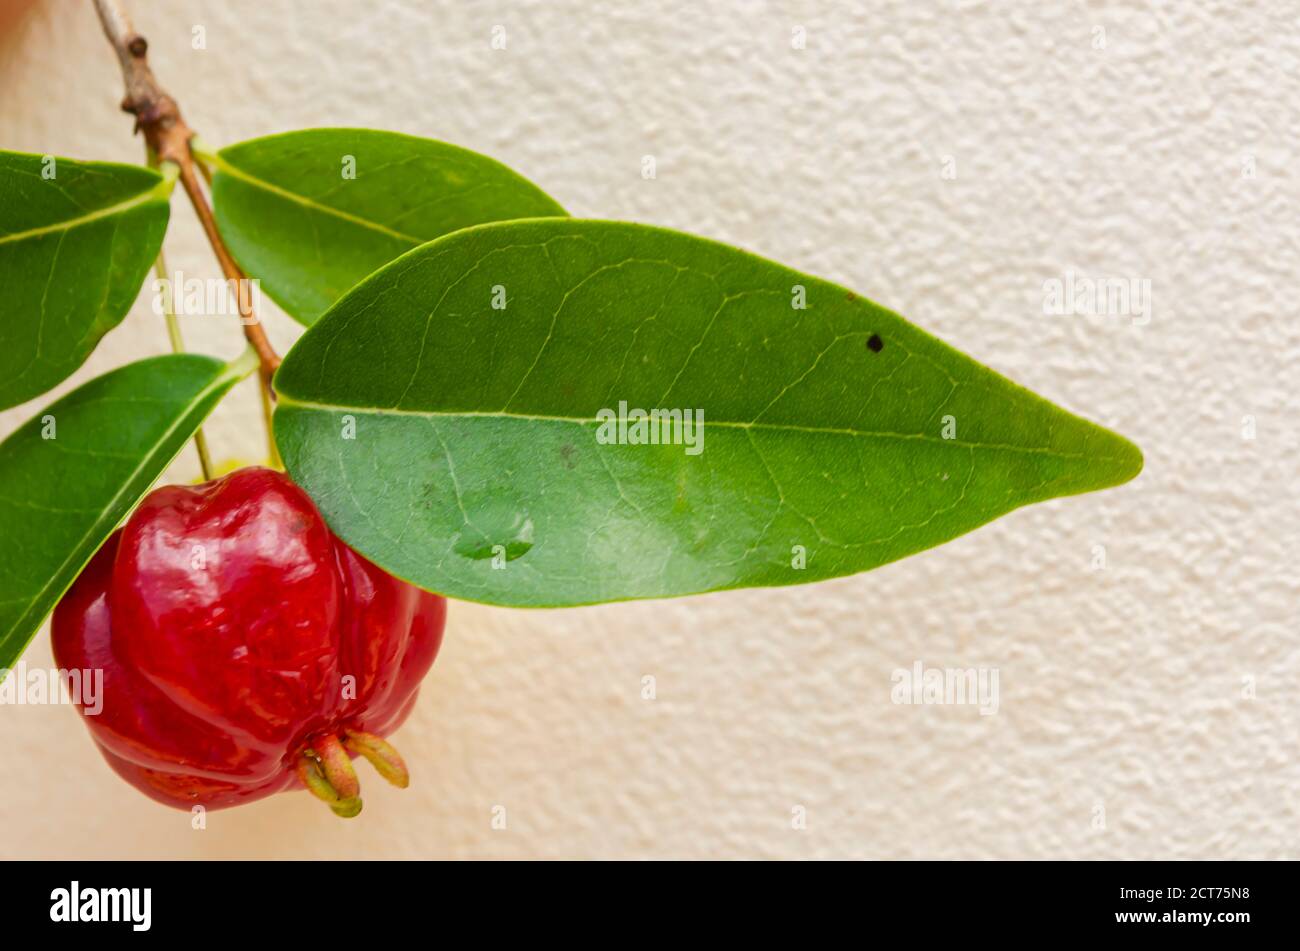 Fruit, And Adaxial Side Of Pitanga Leaf Stock Photo